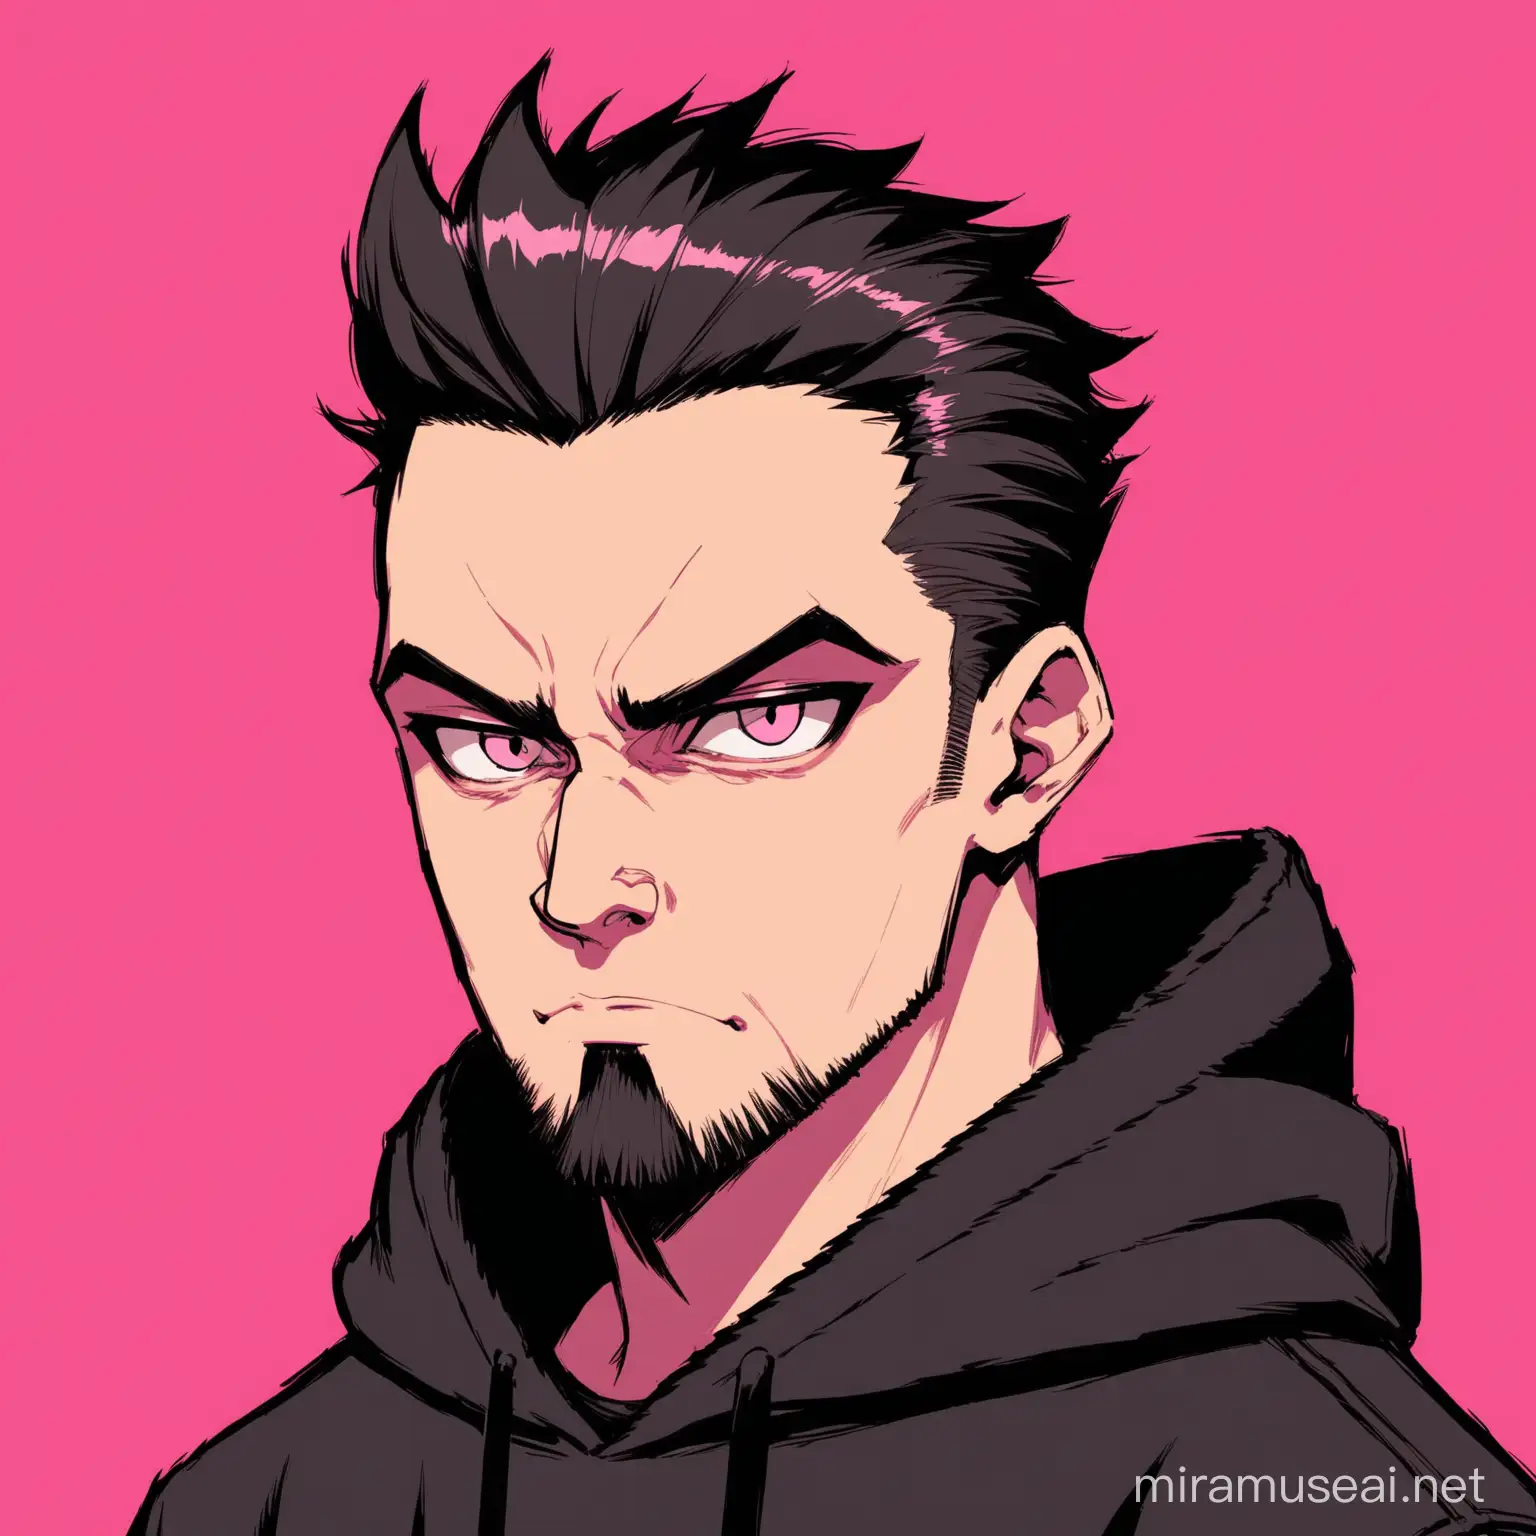 cool,hacker,black hoodie,quiff hairs,aesthetic,m shaped hairline,oblong face shape,small mouth,big nose,handosme ,psycho,pink background,patchy  short beared


